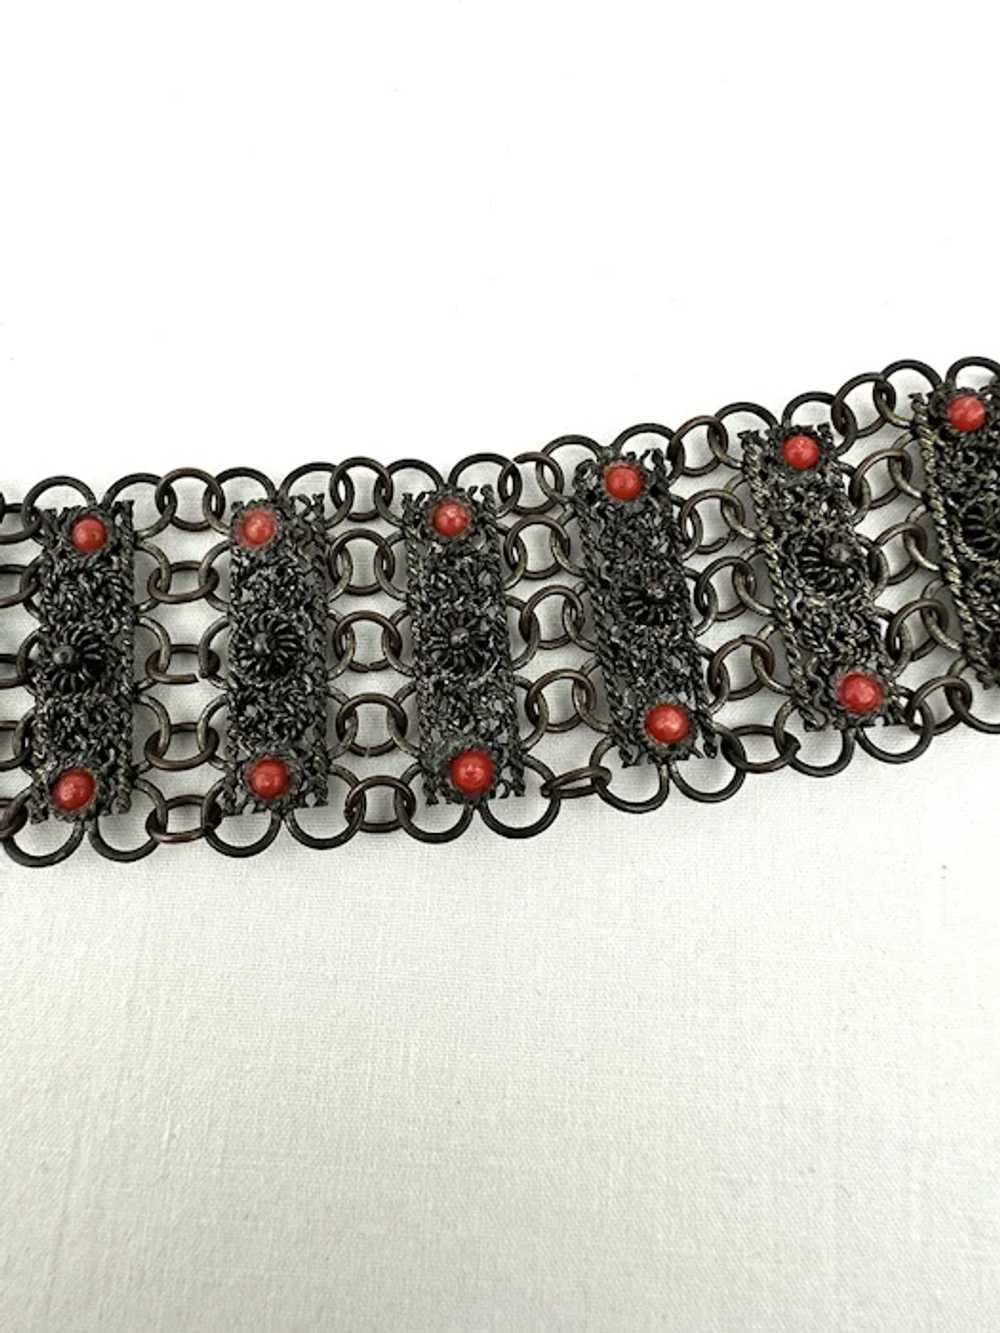 Art Deco Chain Mail and Coral Glass Cuff Bracelet - image 3